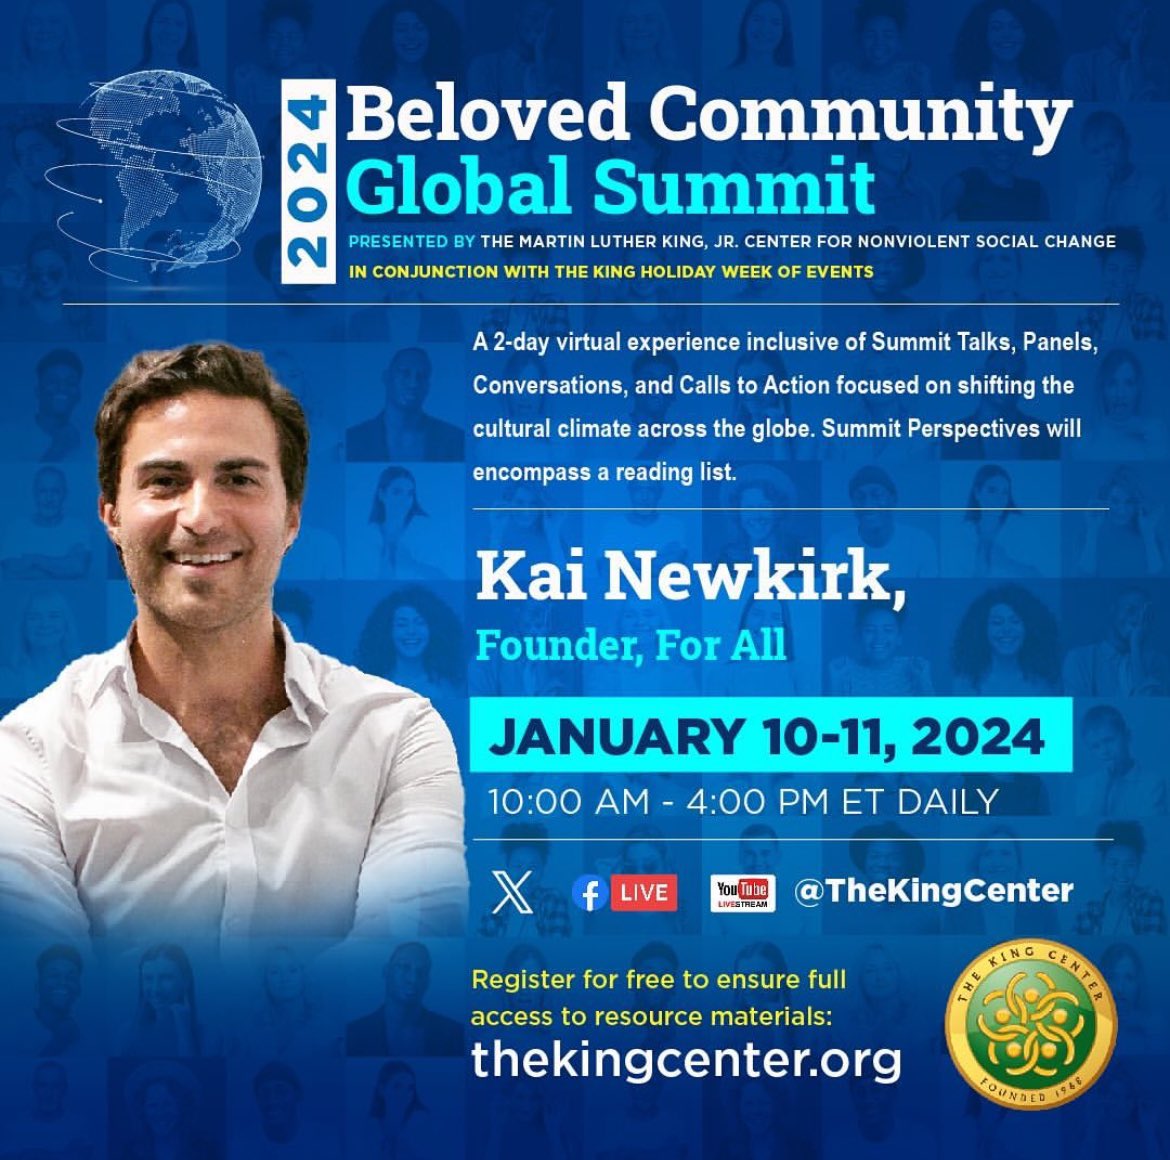 I’m so honored to be invited to speak at @thekingcenter’s Beloved Community Global Summit. Join us 1/10 for this important gathering. Following the King legacy of revolutionary love and nonviolent leadership to eradicate injustice and build true peace has never been more urgent.